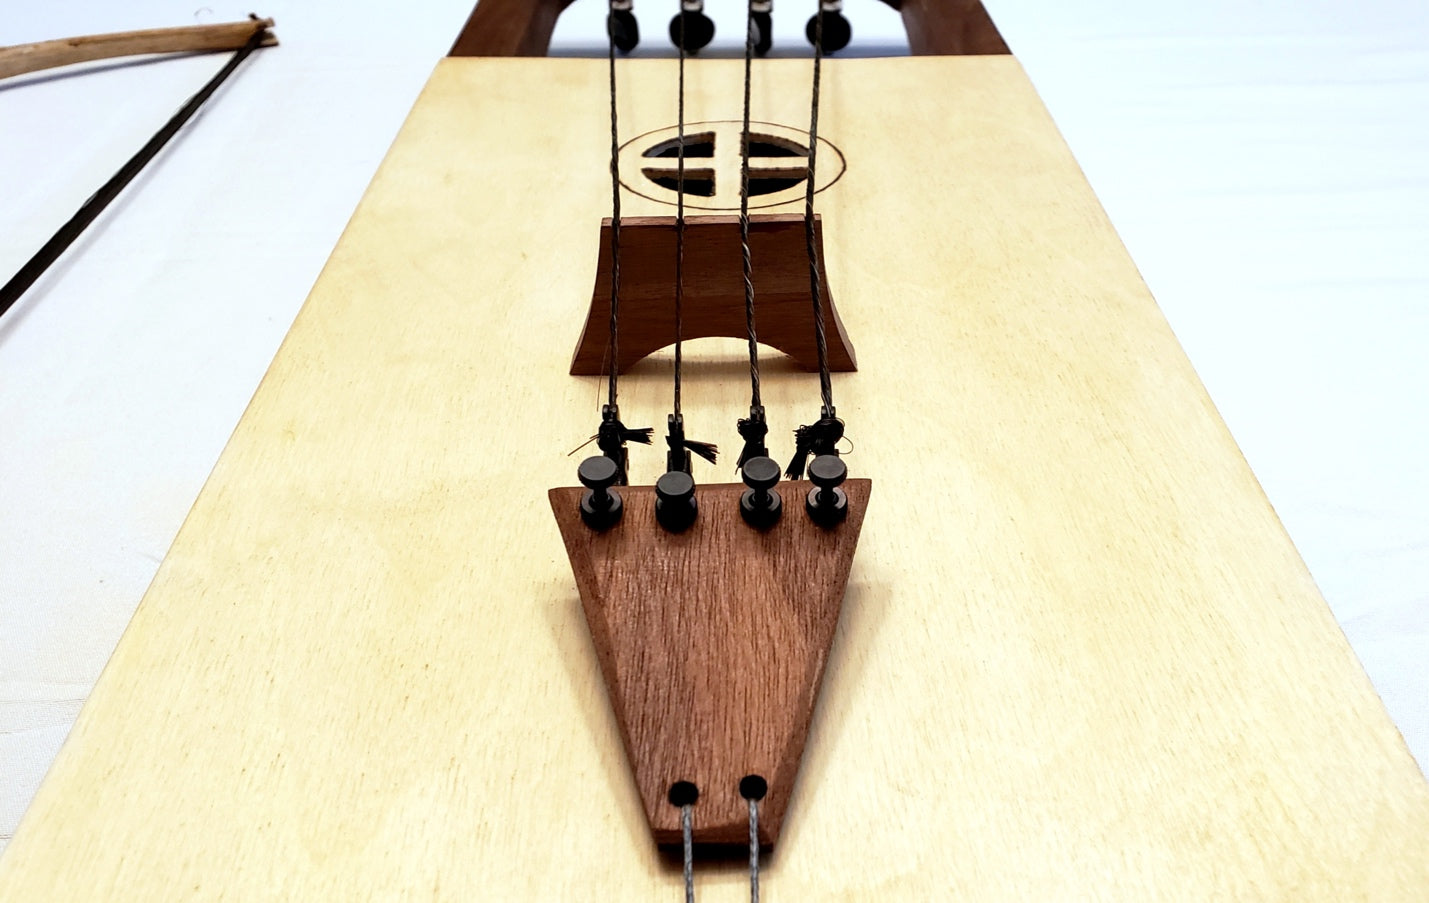 Tagelharpa: Tail Piece and Strings